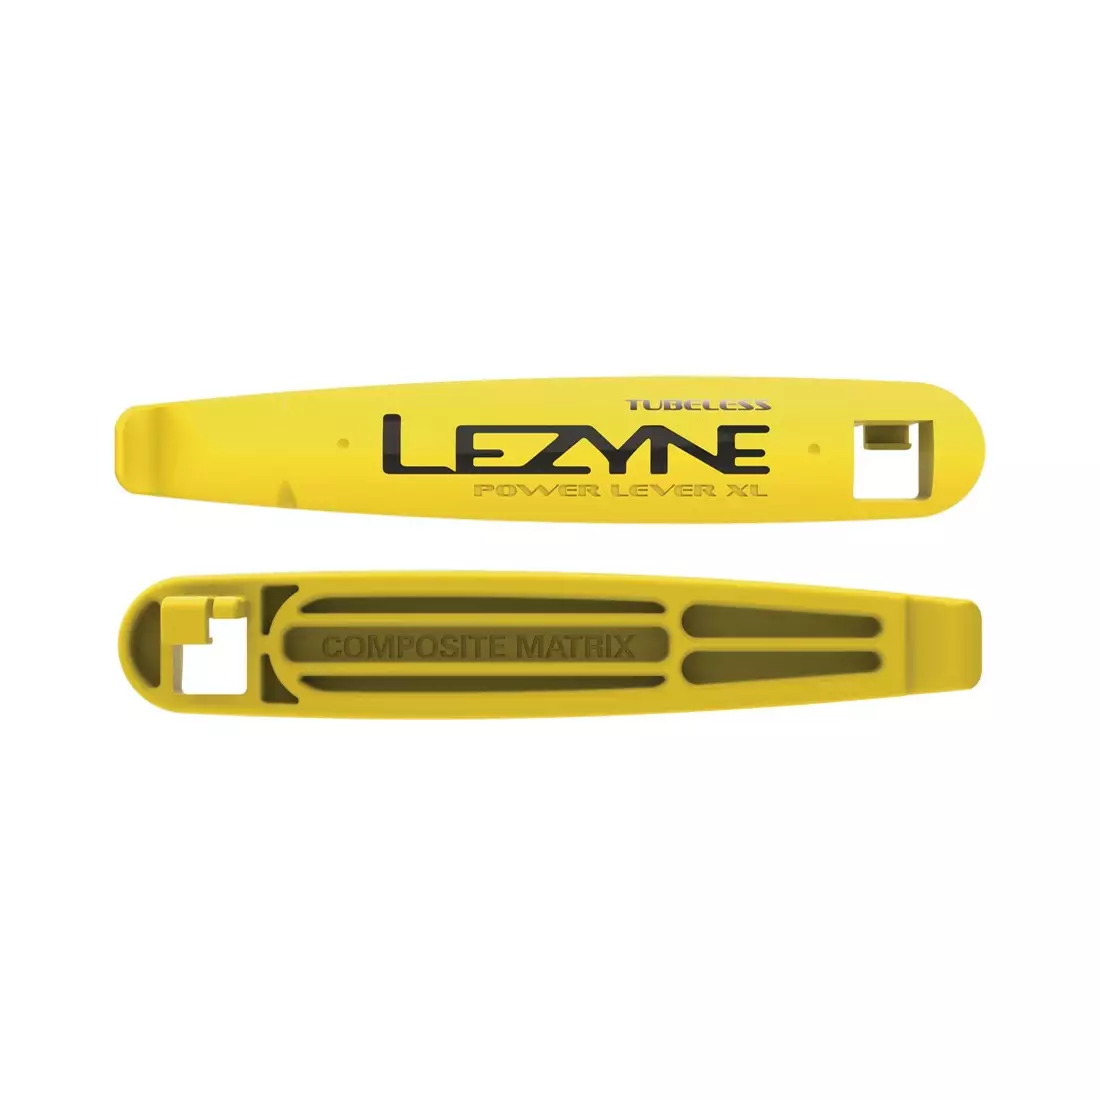 LEZYNE bicycle tire levers TUBELESS POWER XL TIRE LEVER yellow LZN-1-TL-TBLS-V116